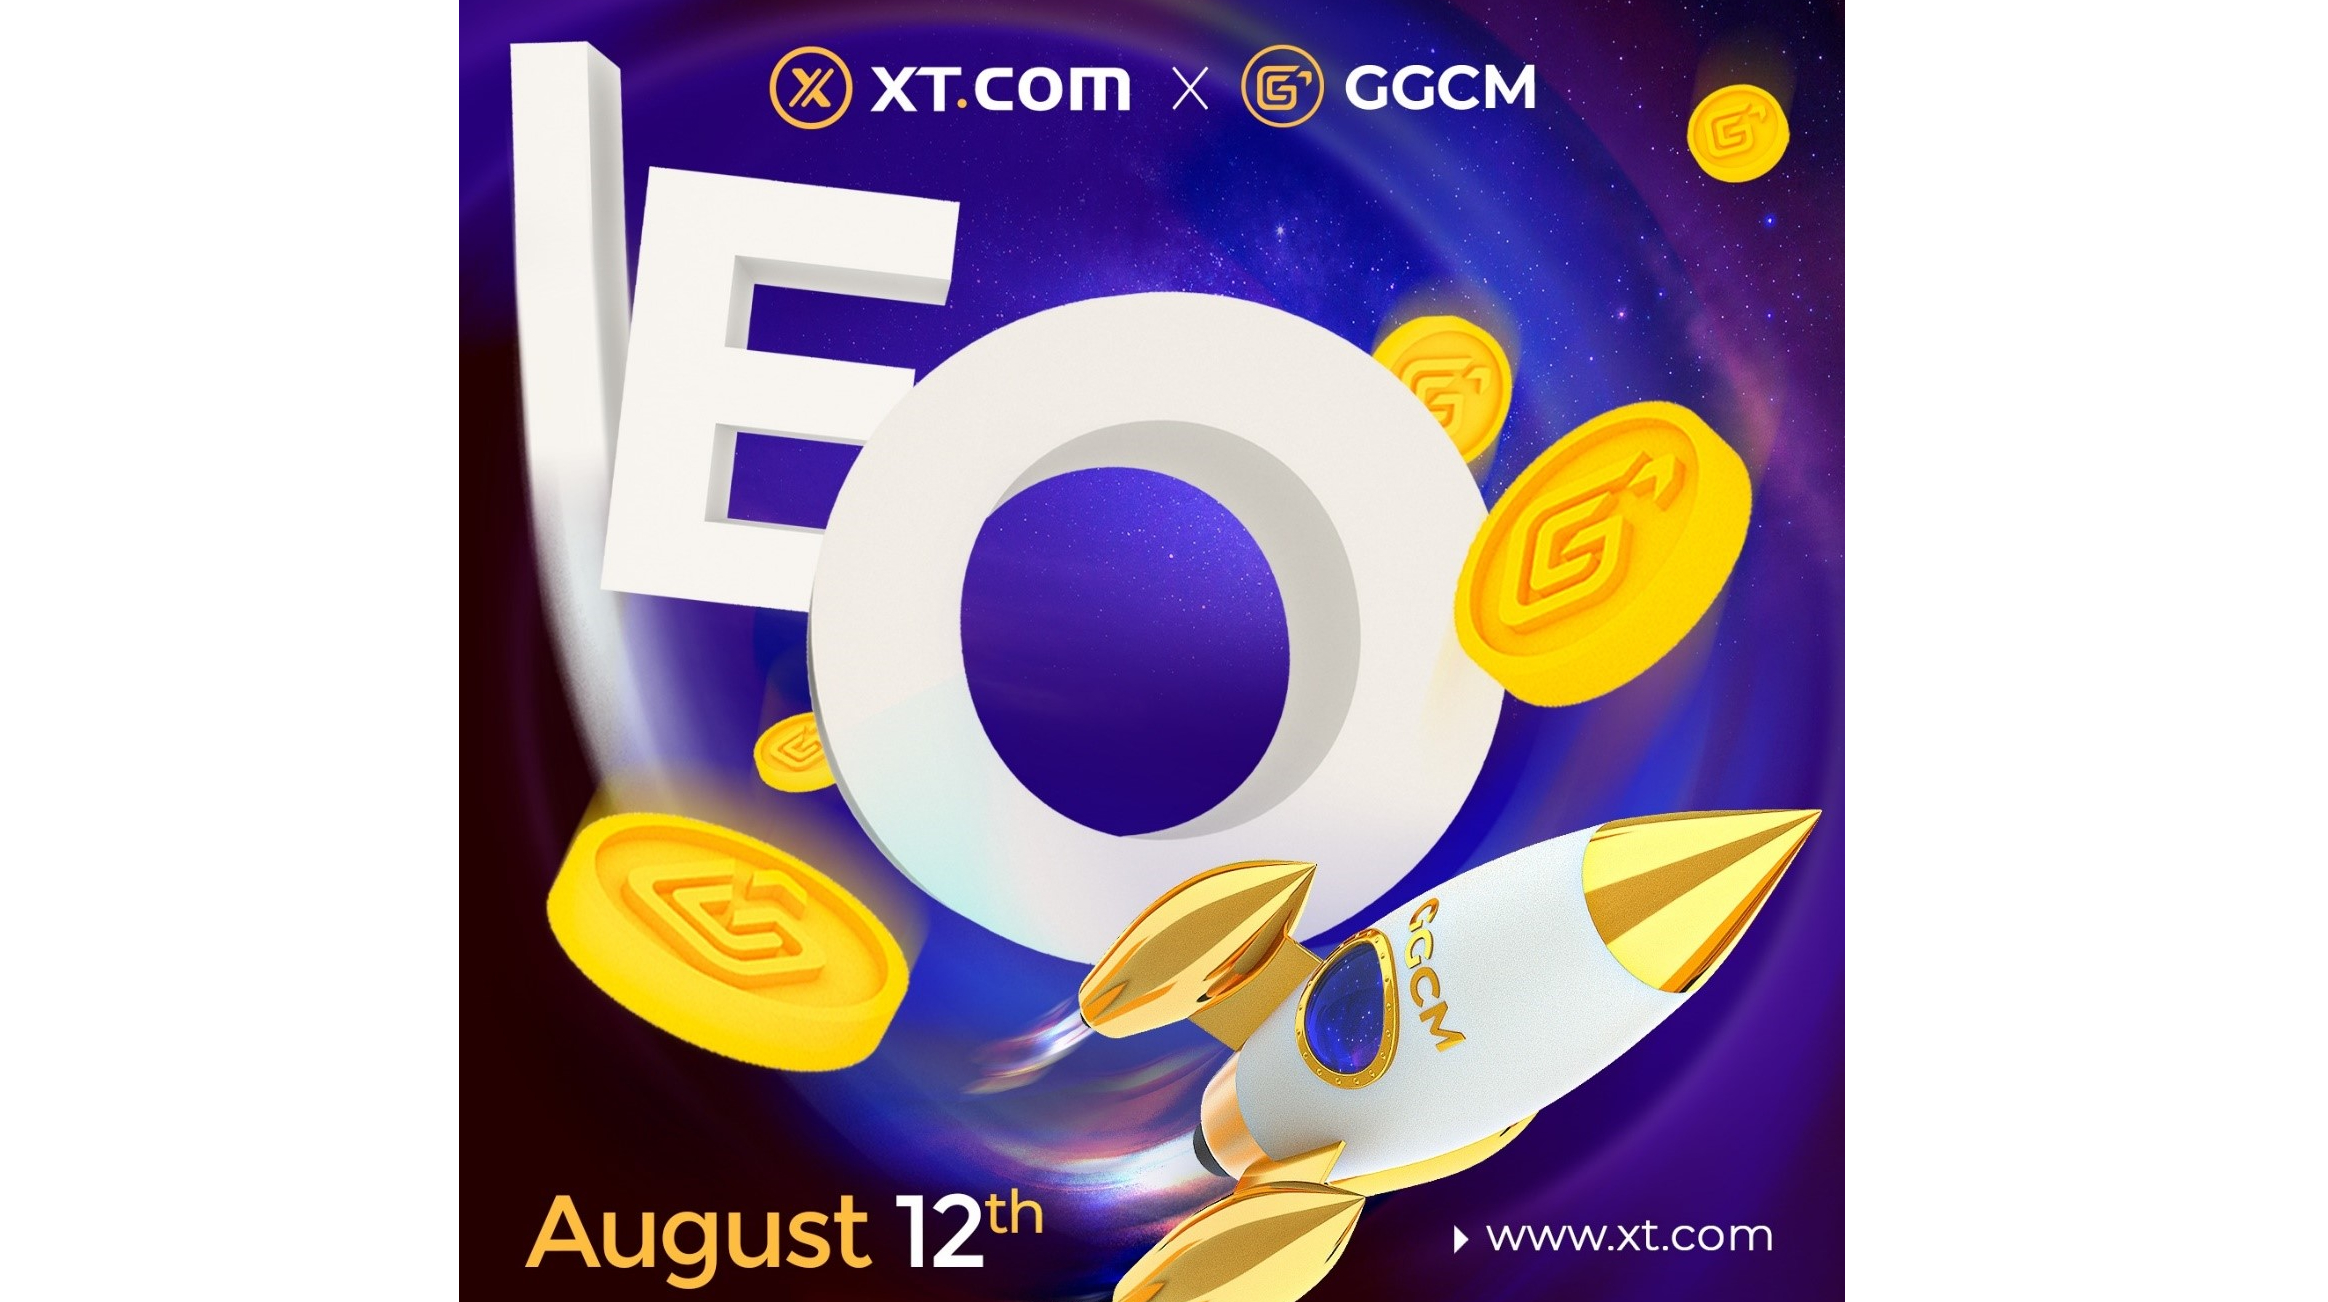 GGCM announced the date of its upcoming IEO sale on August 12.